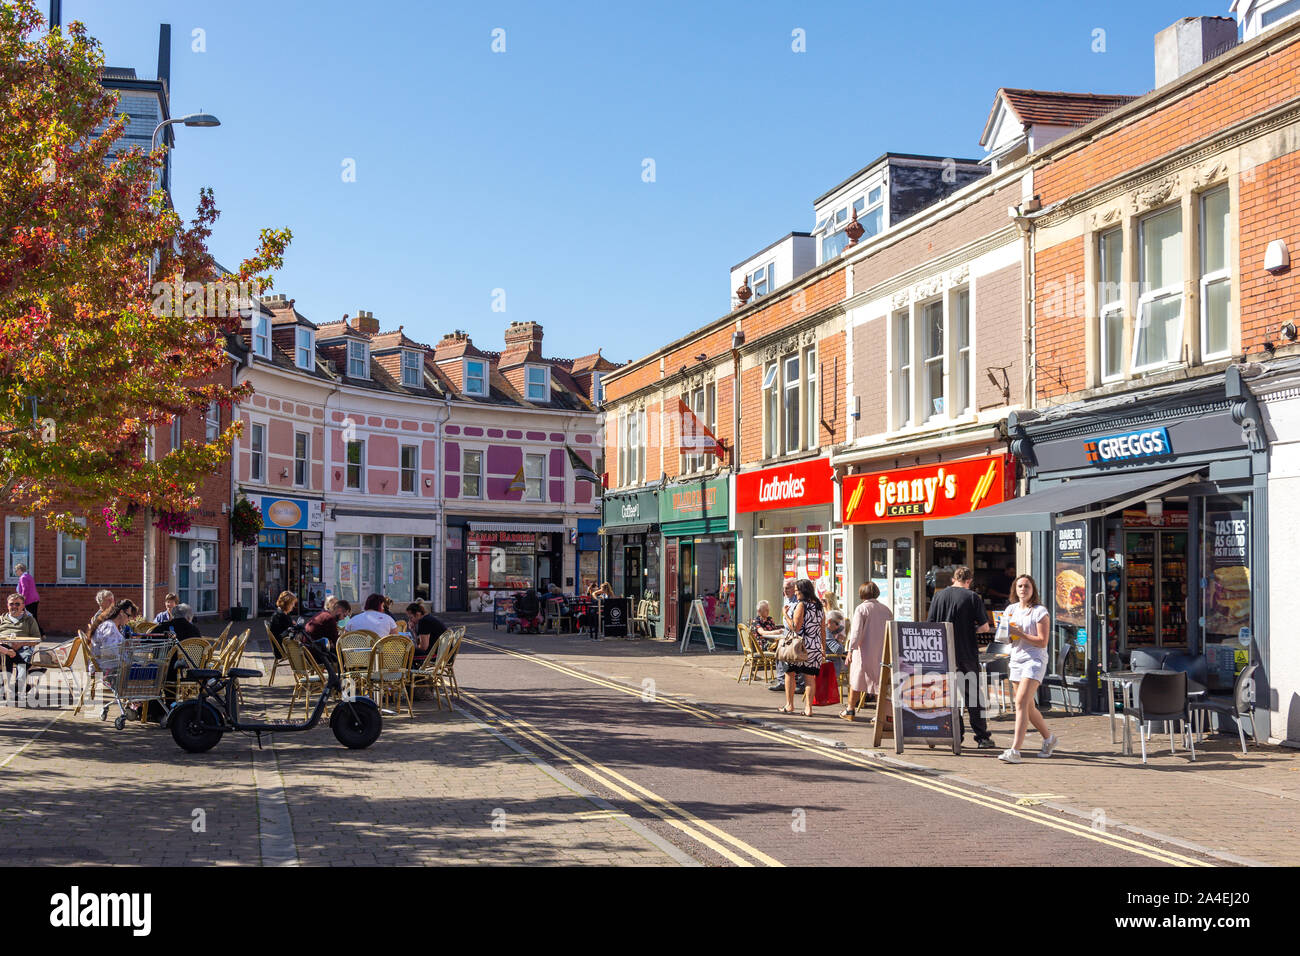 Outdoor cafes, Queen's Square, Clevedon, Somerset, England, United Kingdom Stock Photo